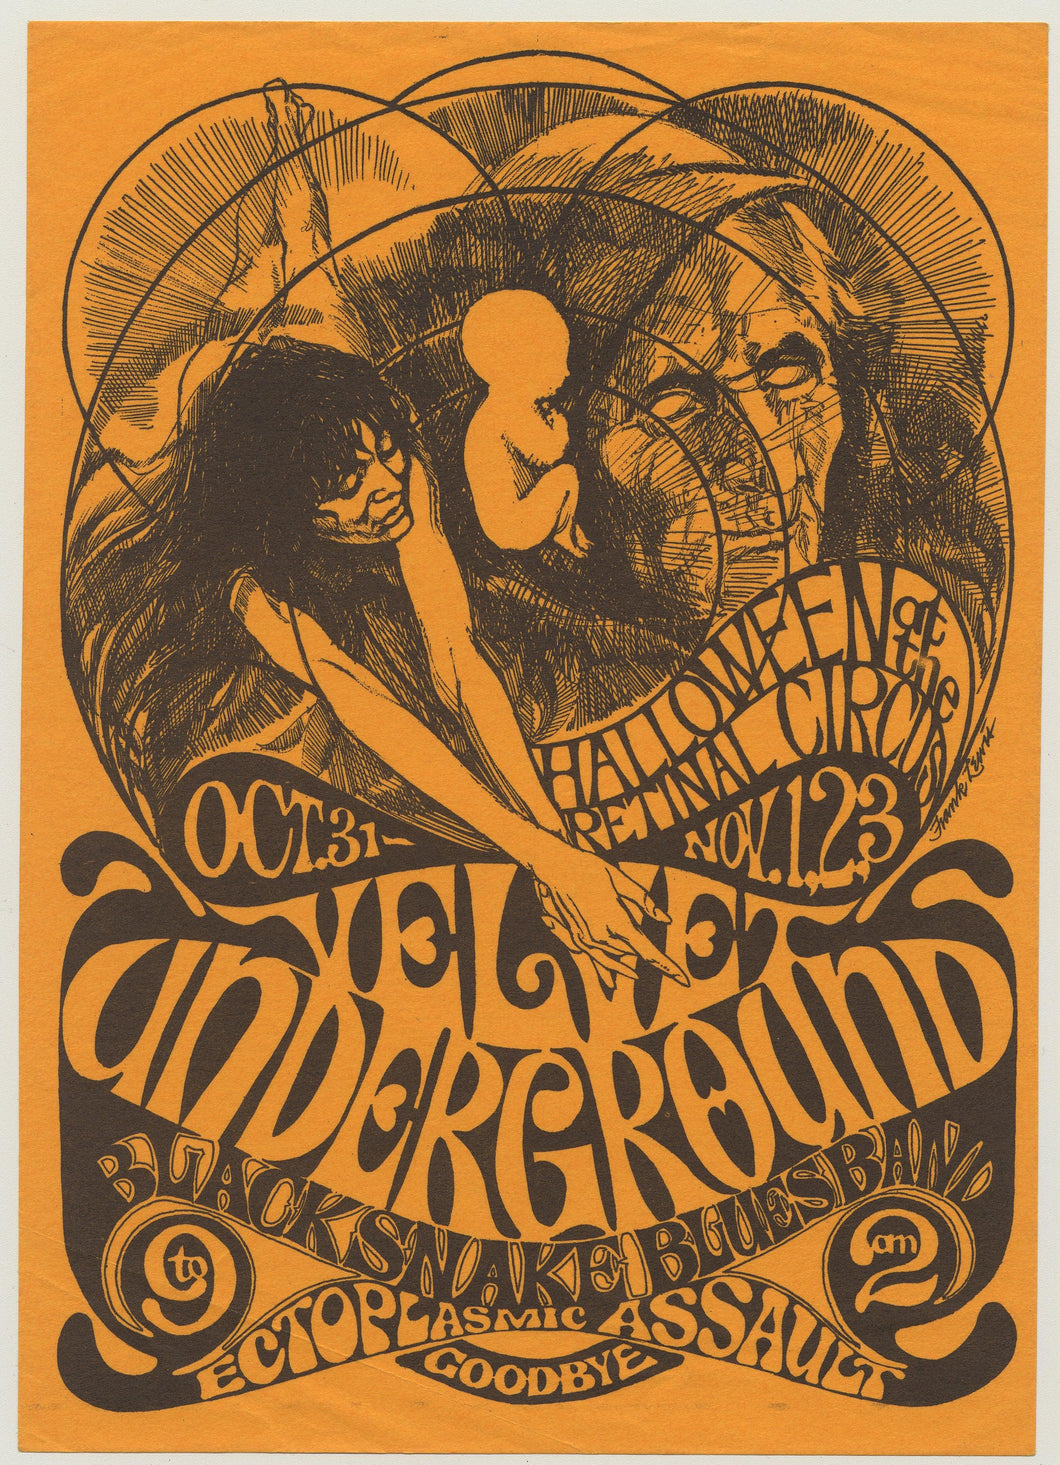 Velvet Underground poster - Live at Retinal Circus 1968 Large A2 reproduction - Original Music and Movie Posters for sale from Bamalama - Online Poster Store UK London